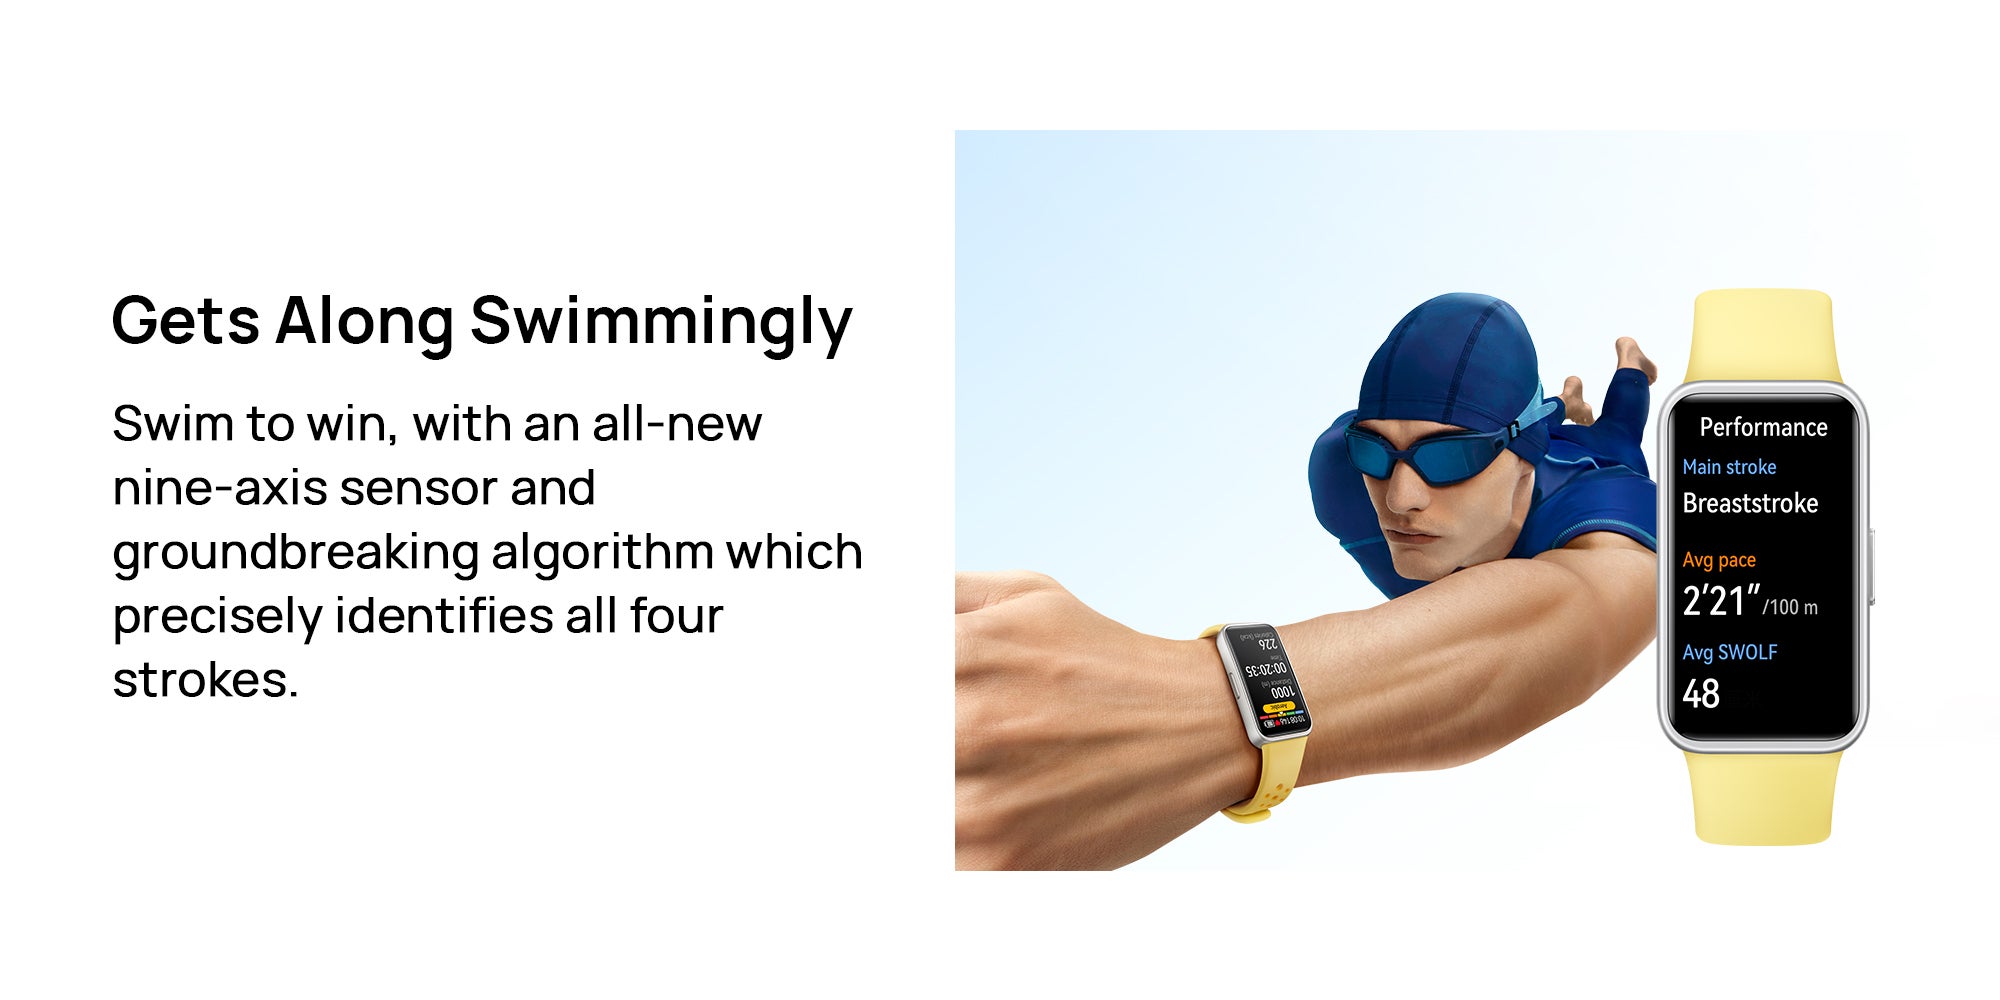 Band 9 Smart Watch, Ultra-Thin Design And Comfortable Wearing, Scientific Sleep Analysis, Durable Battery Life, IOS And Android Lemon Yellow